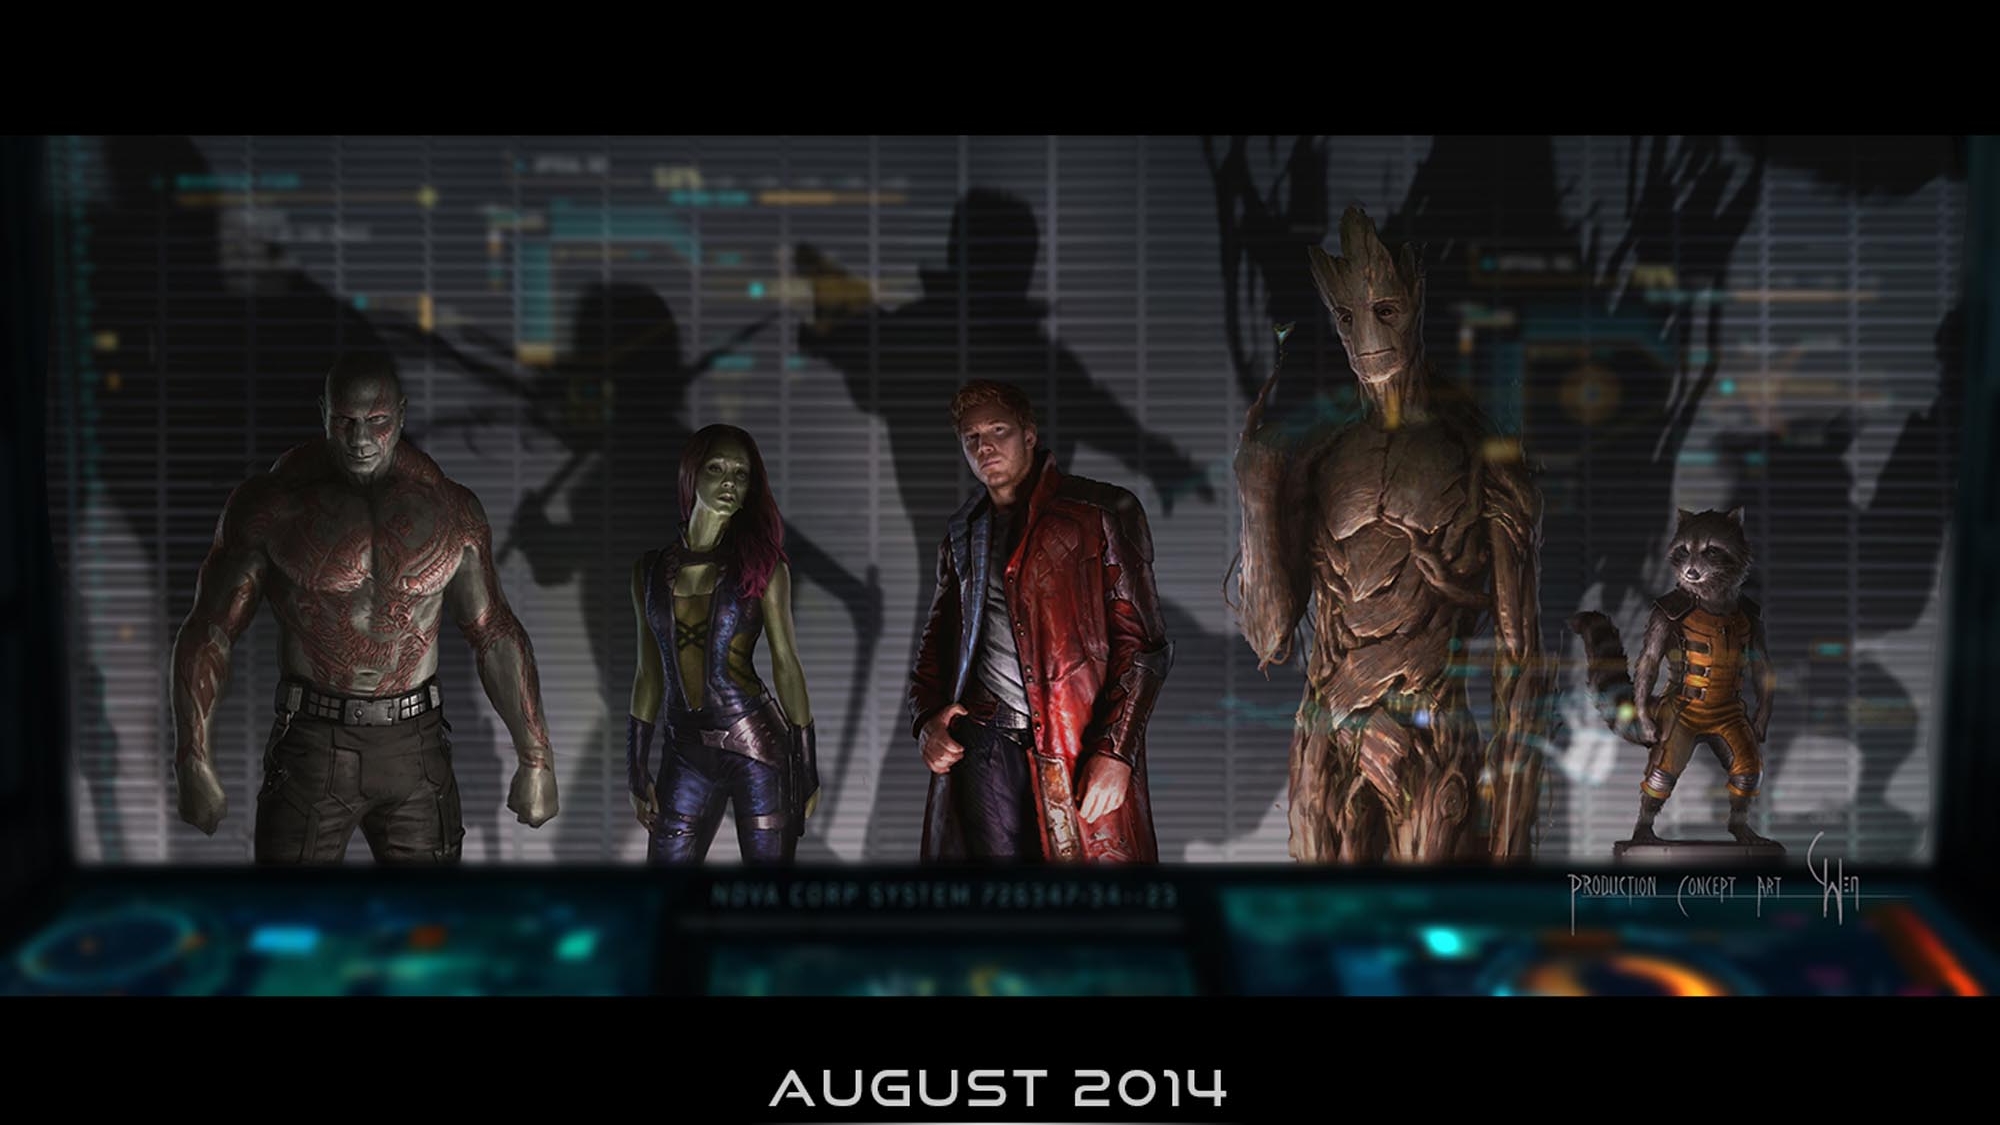 guardians of the galaxy full movie download free